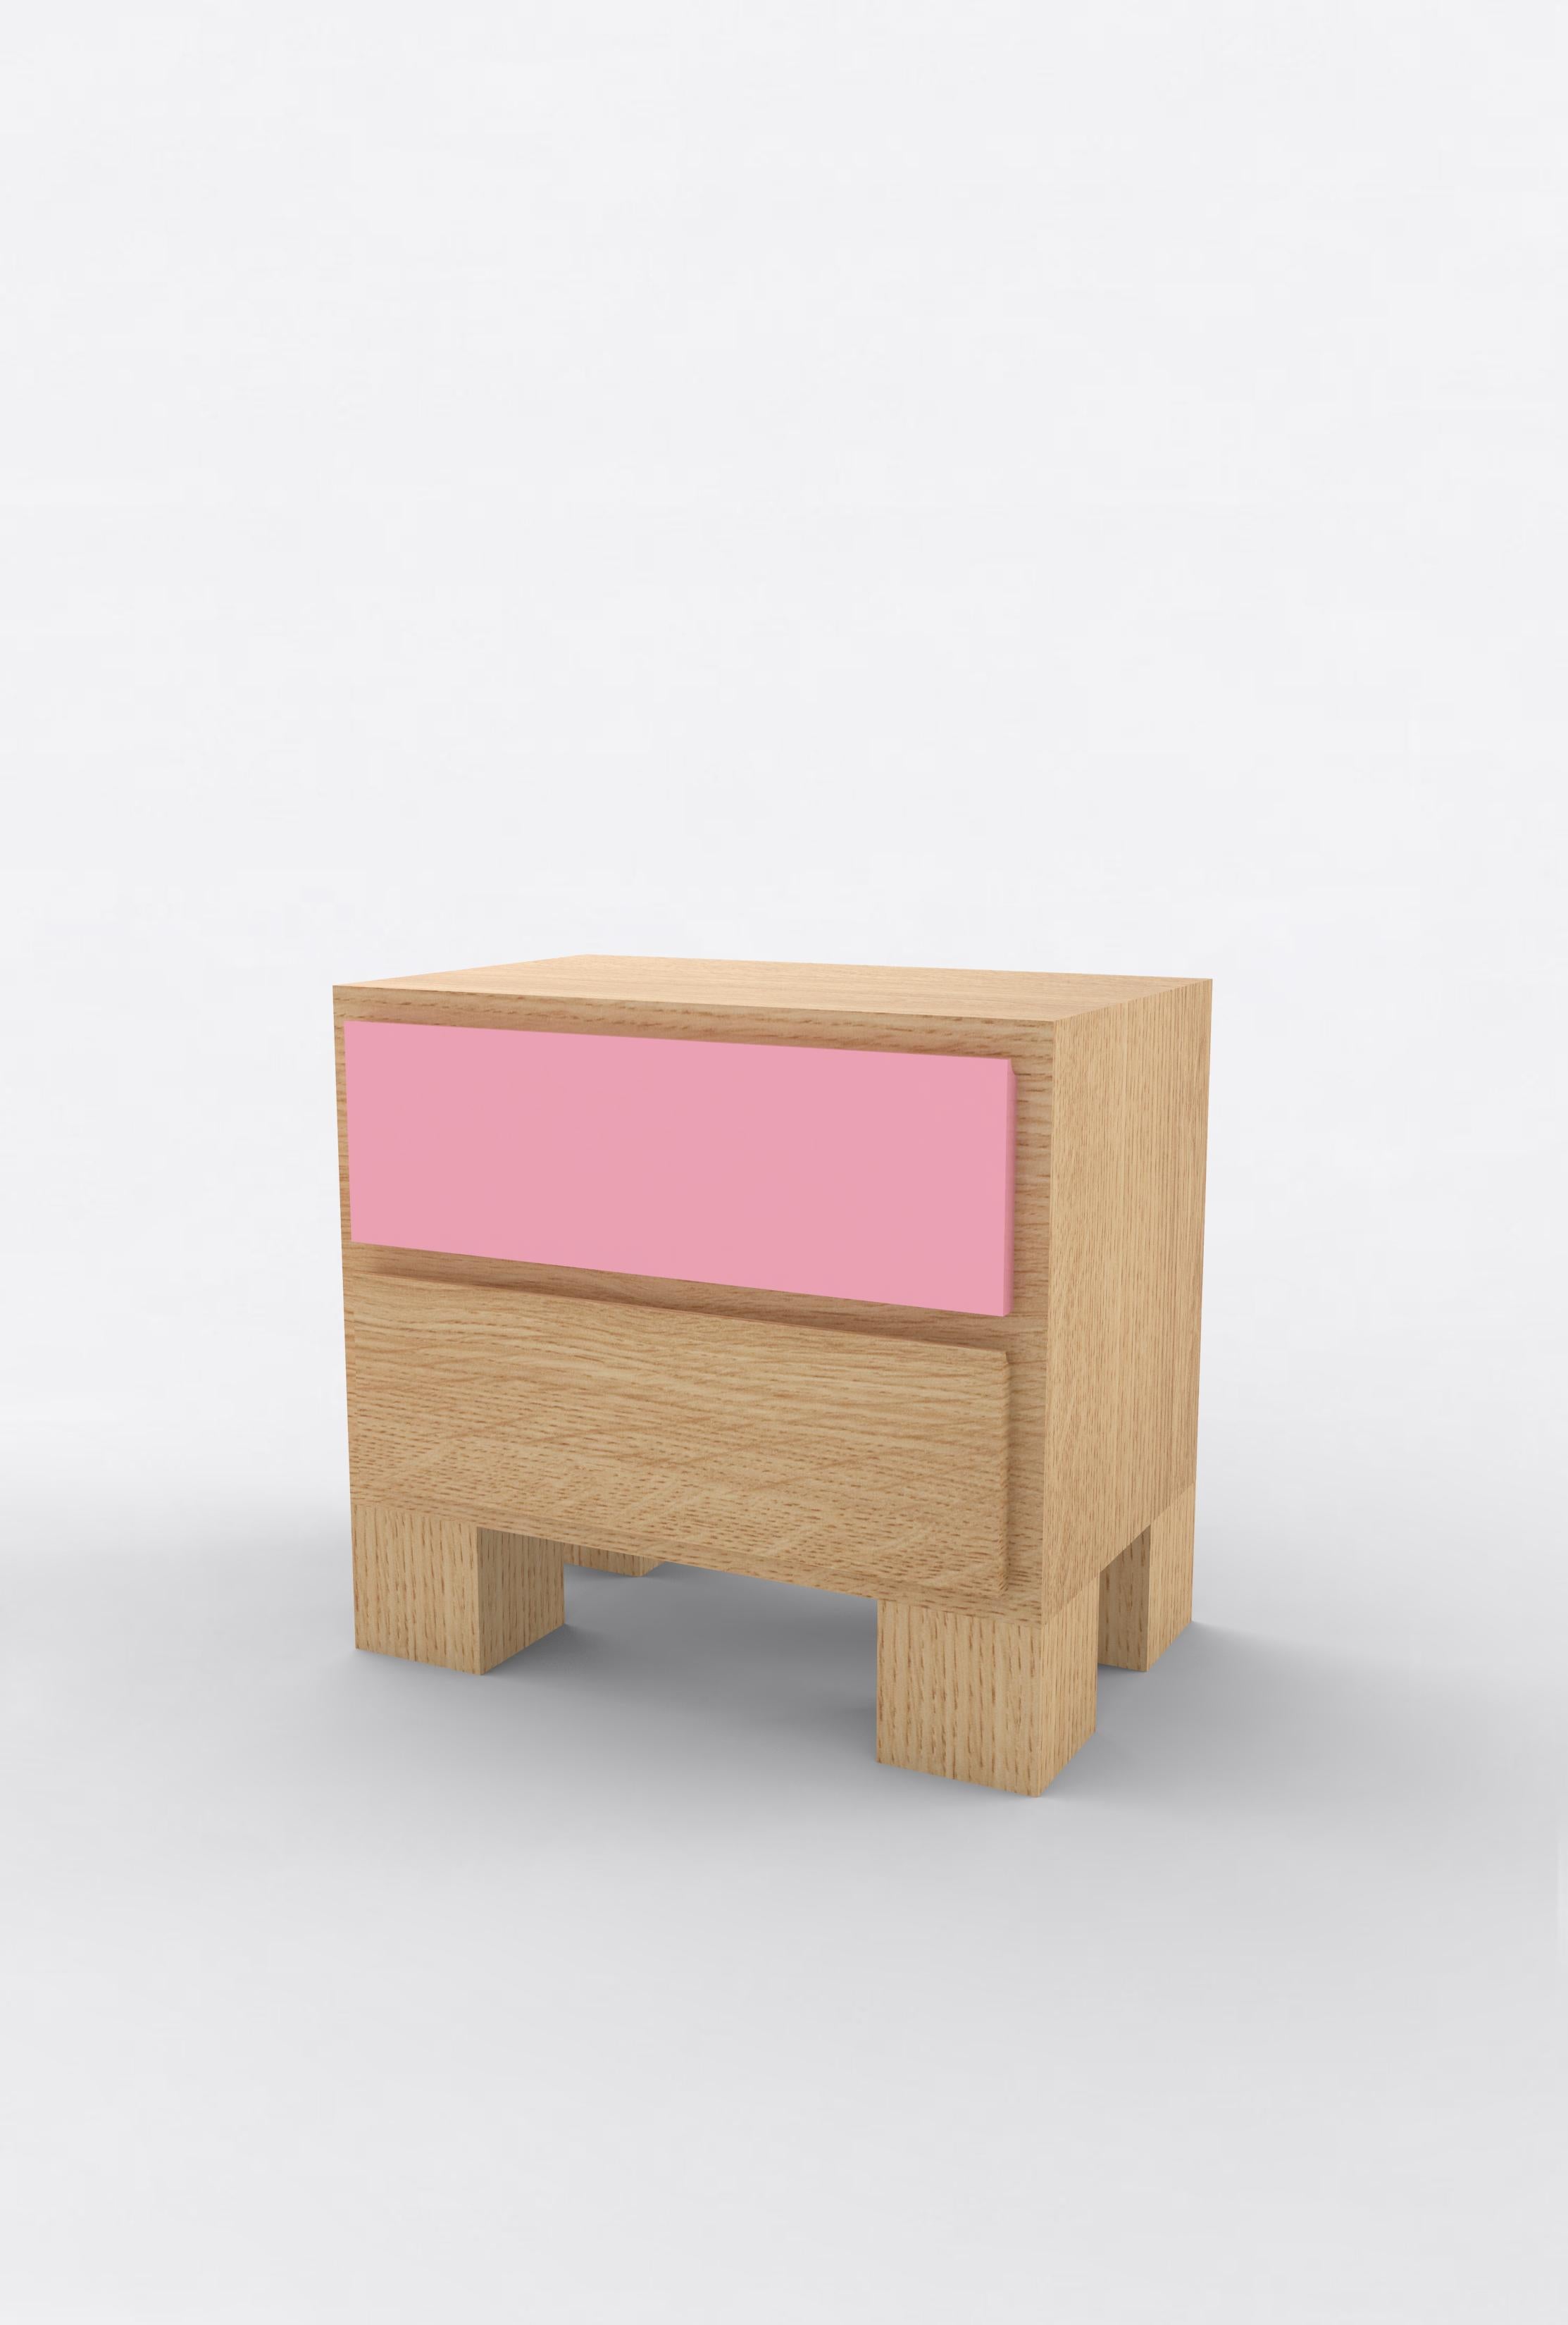 Post-Modern Contemporary 101 Bedside in Oak and Color by Orphan Work, 2020 For Sale